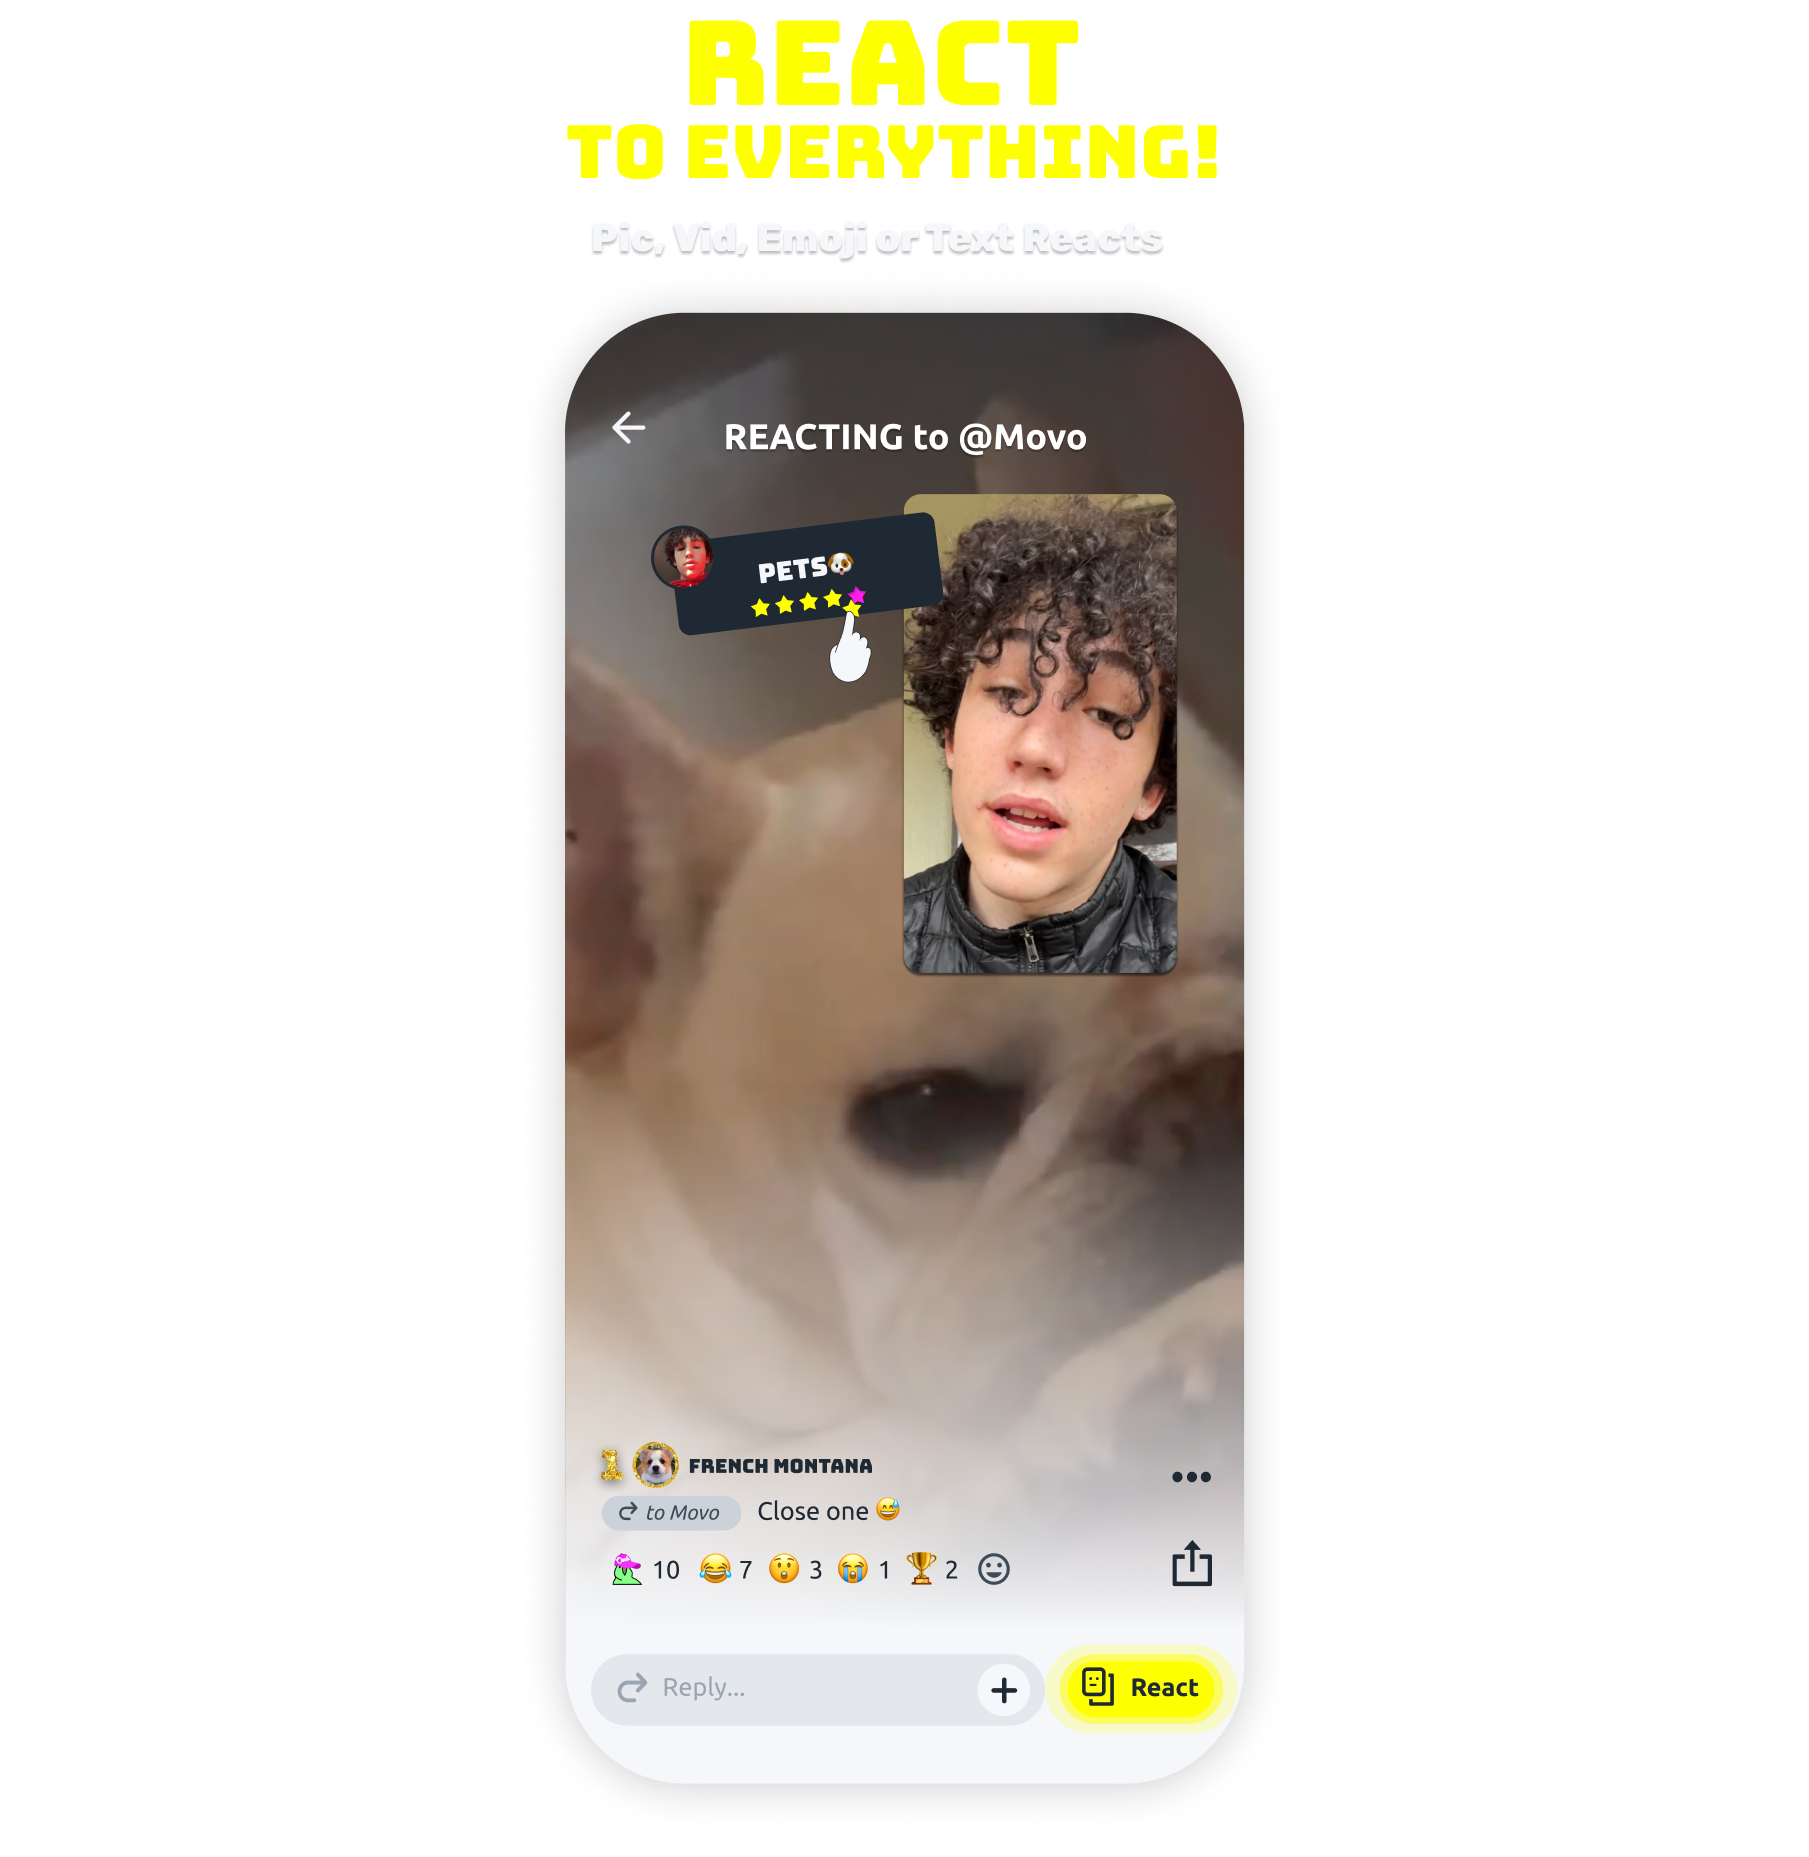 React to everything! Pic, Vid, Emoji or Text Reacts